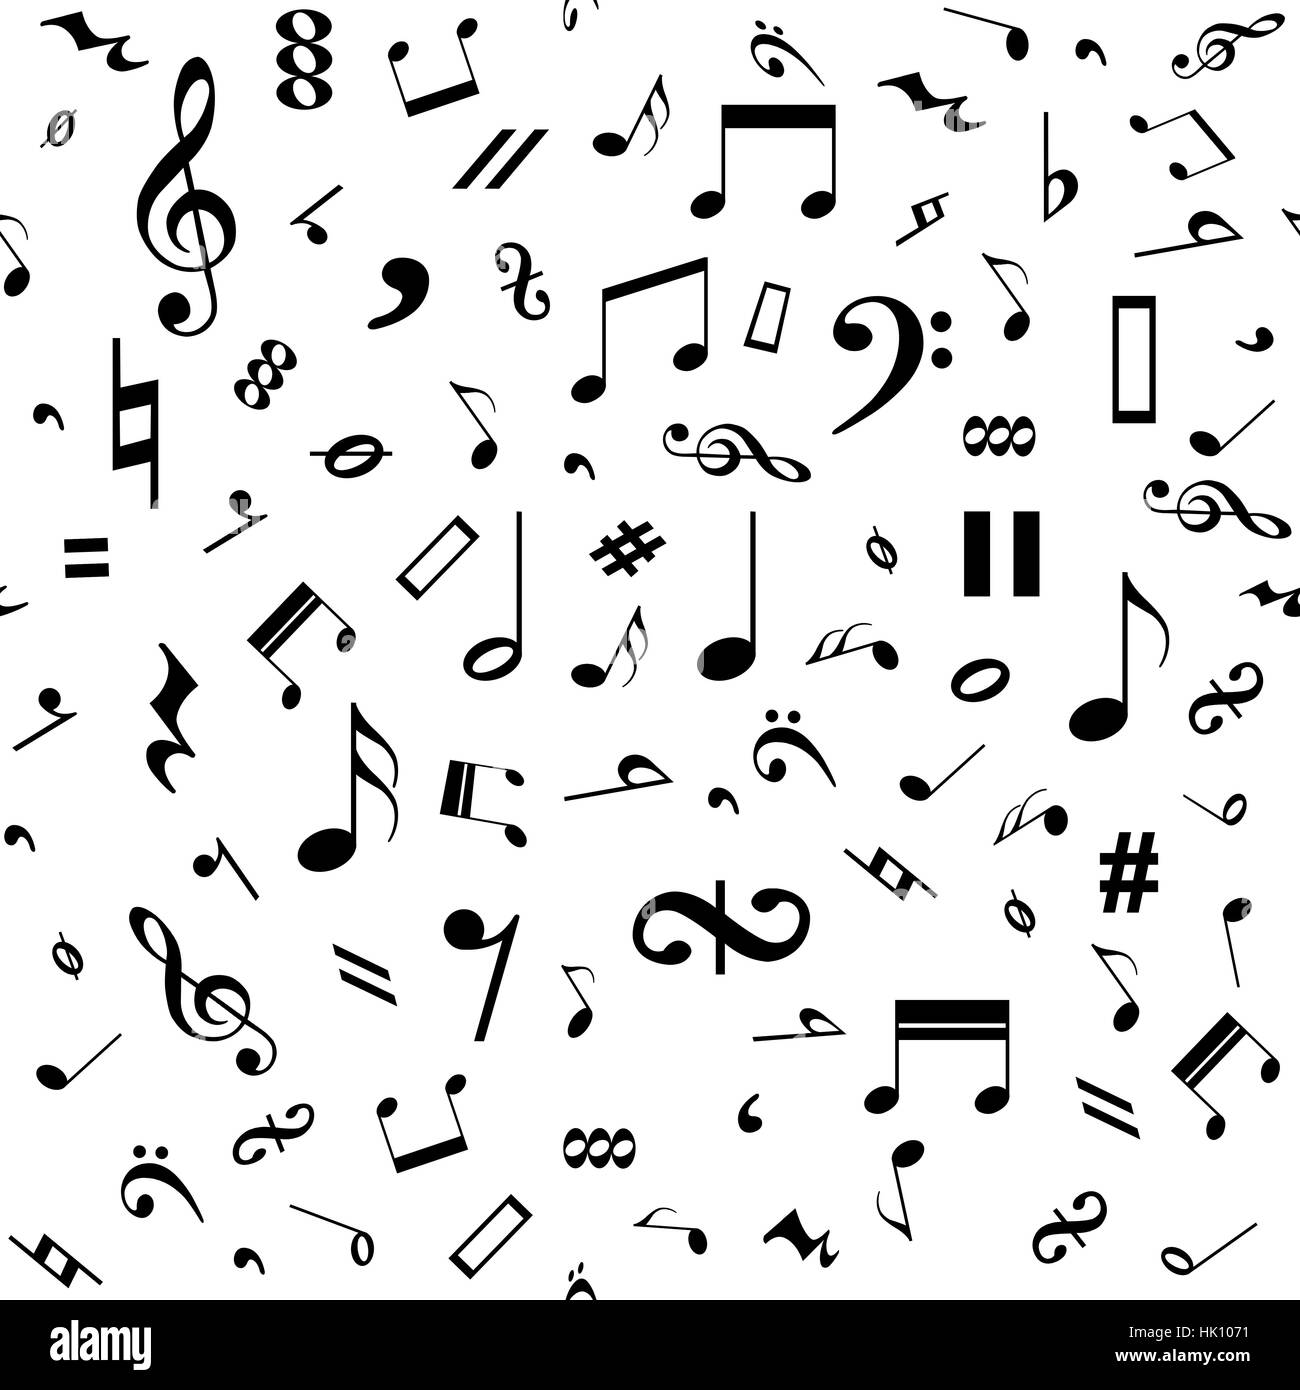 Music notes background Black and White Stock Photos & Images - Alamy